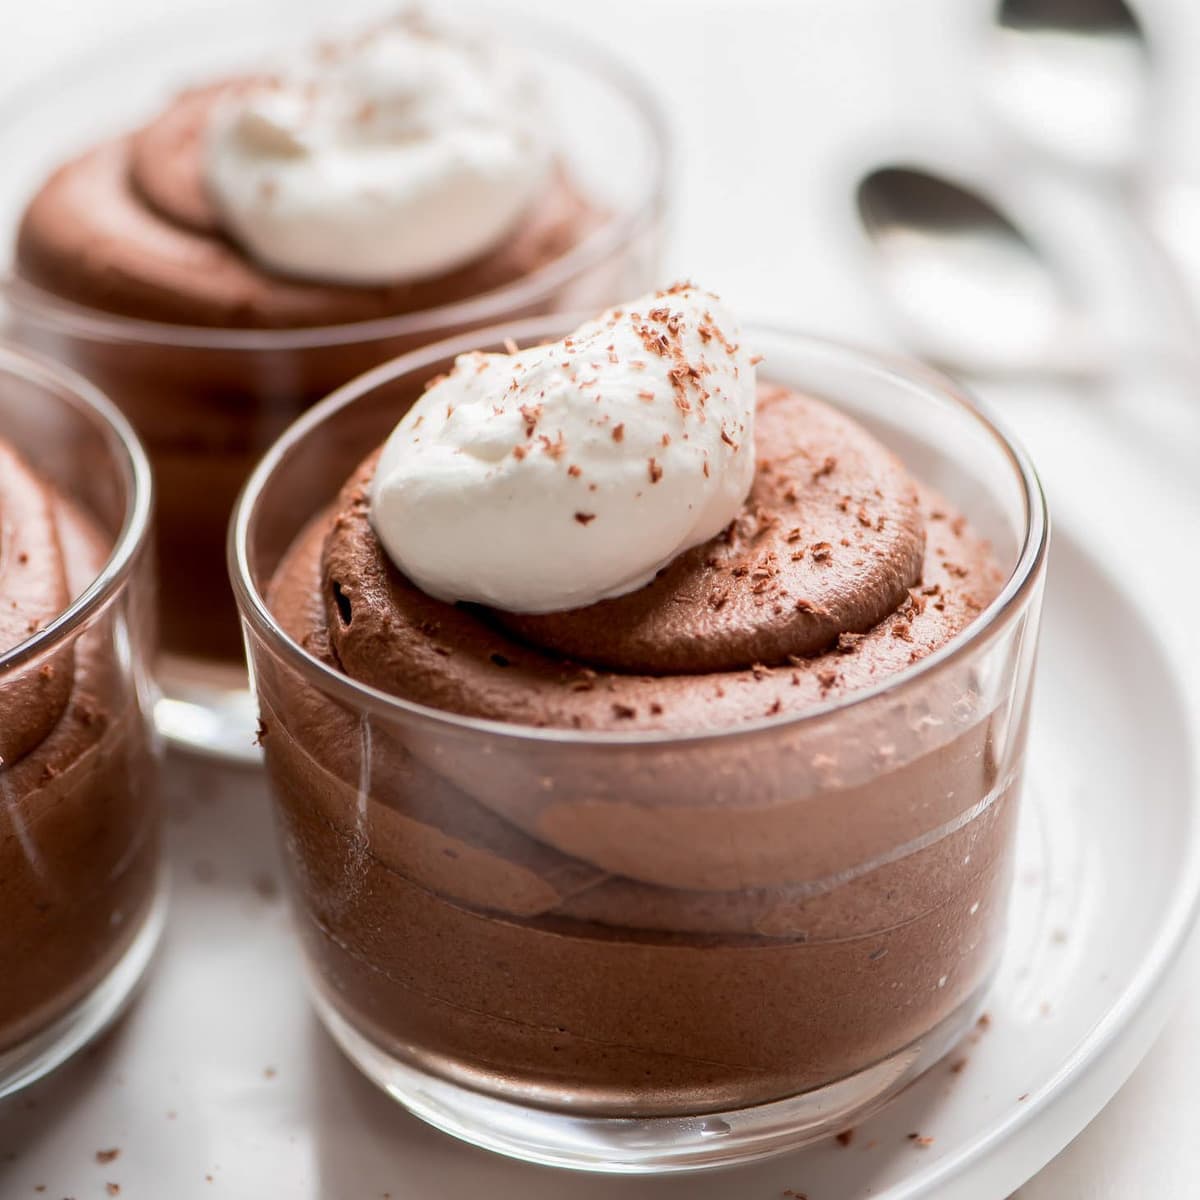 Chocolate Mousse served in glass dishes.